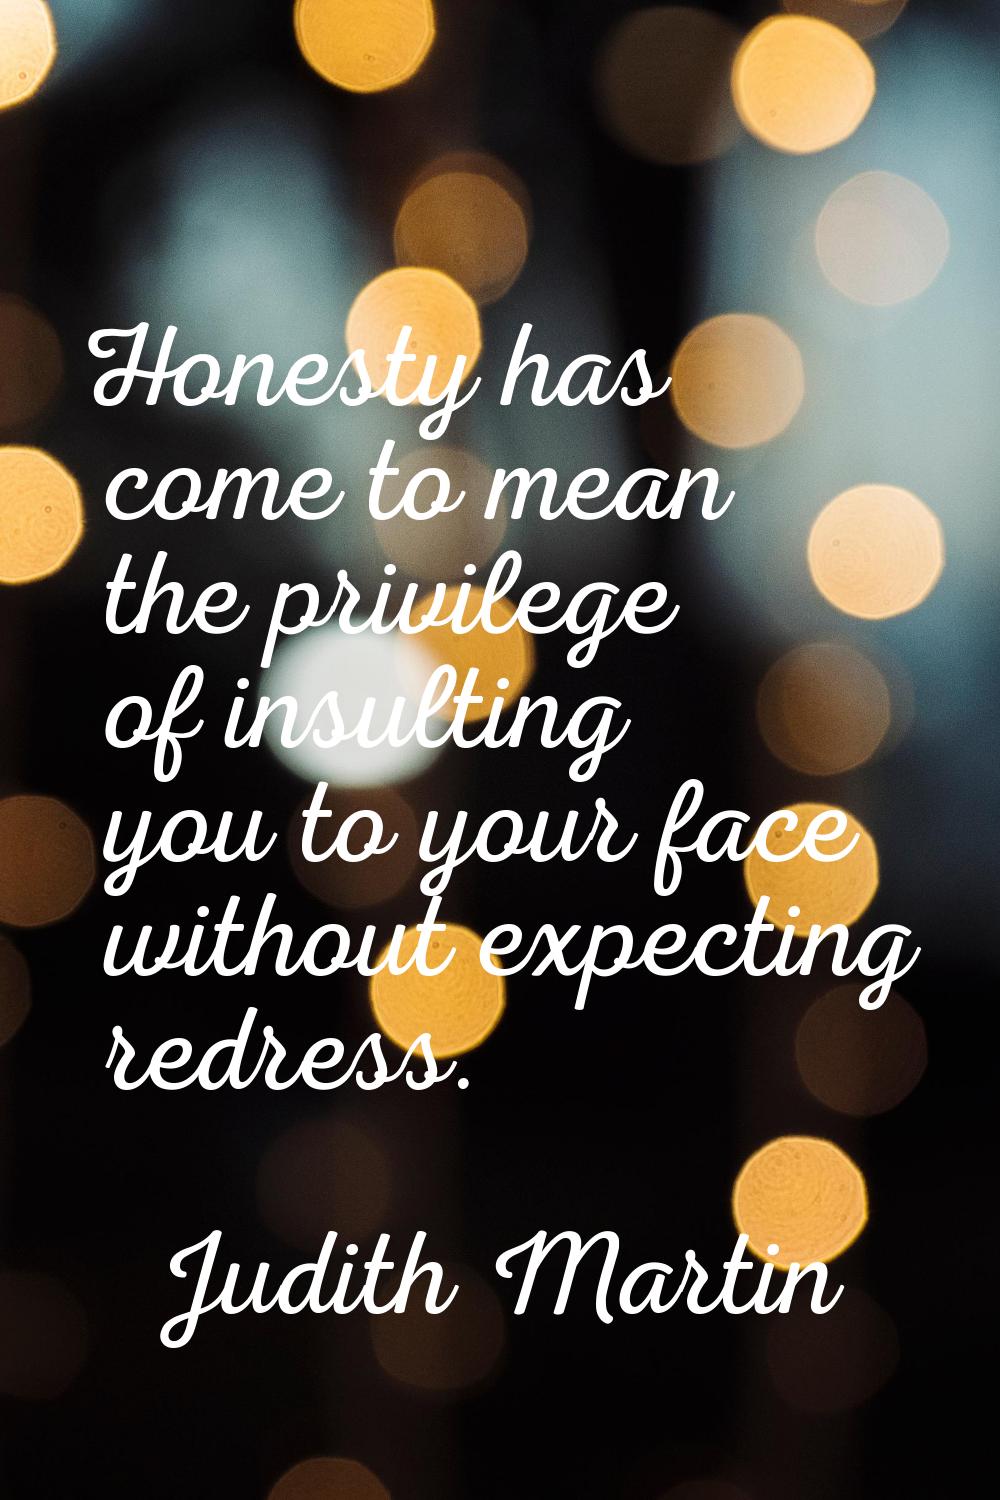 Honesty has come to mean the privilege of insulting you to your face without expecting redress.